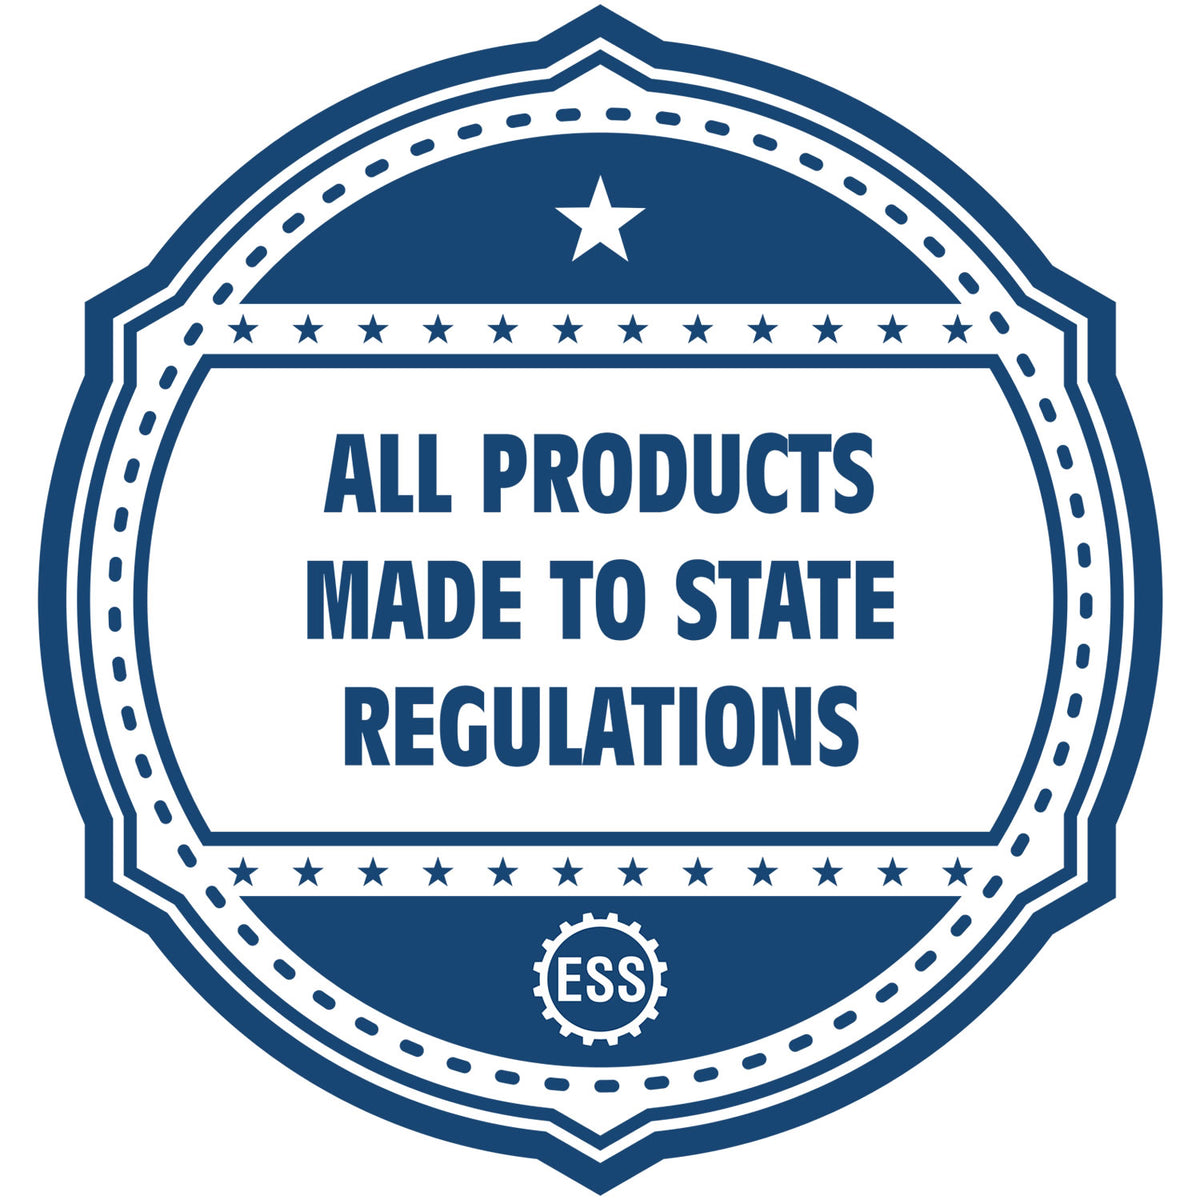 An icon or badge element for the Soft Vermont Professional Engineer Seal showing that this product is made in compliance with state regulations.